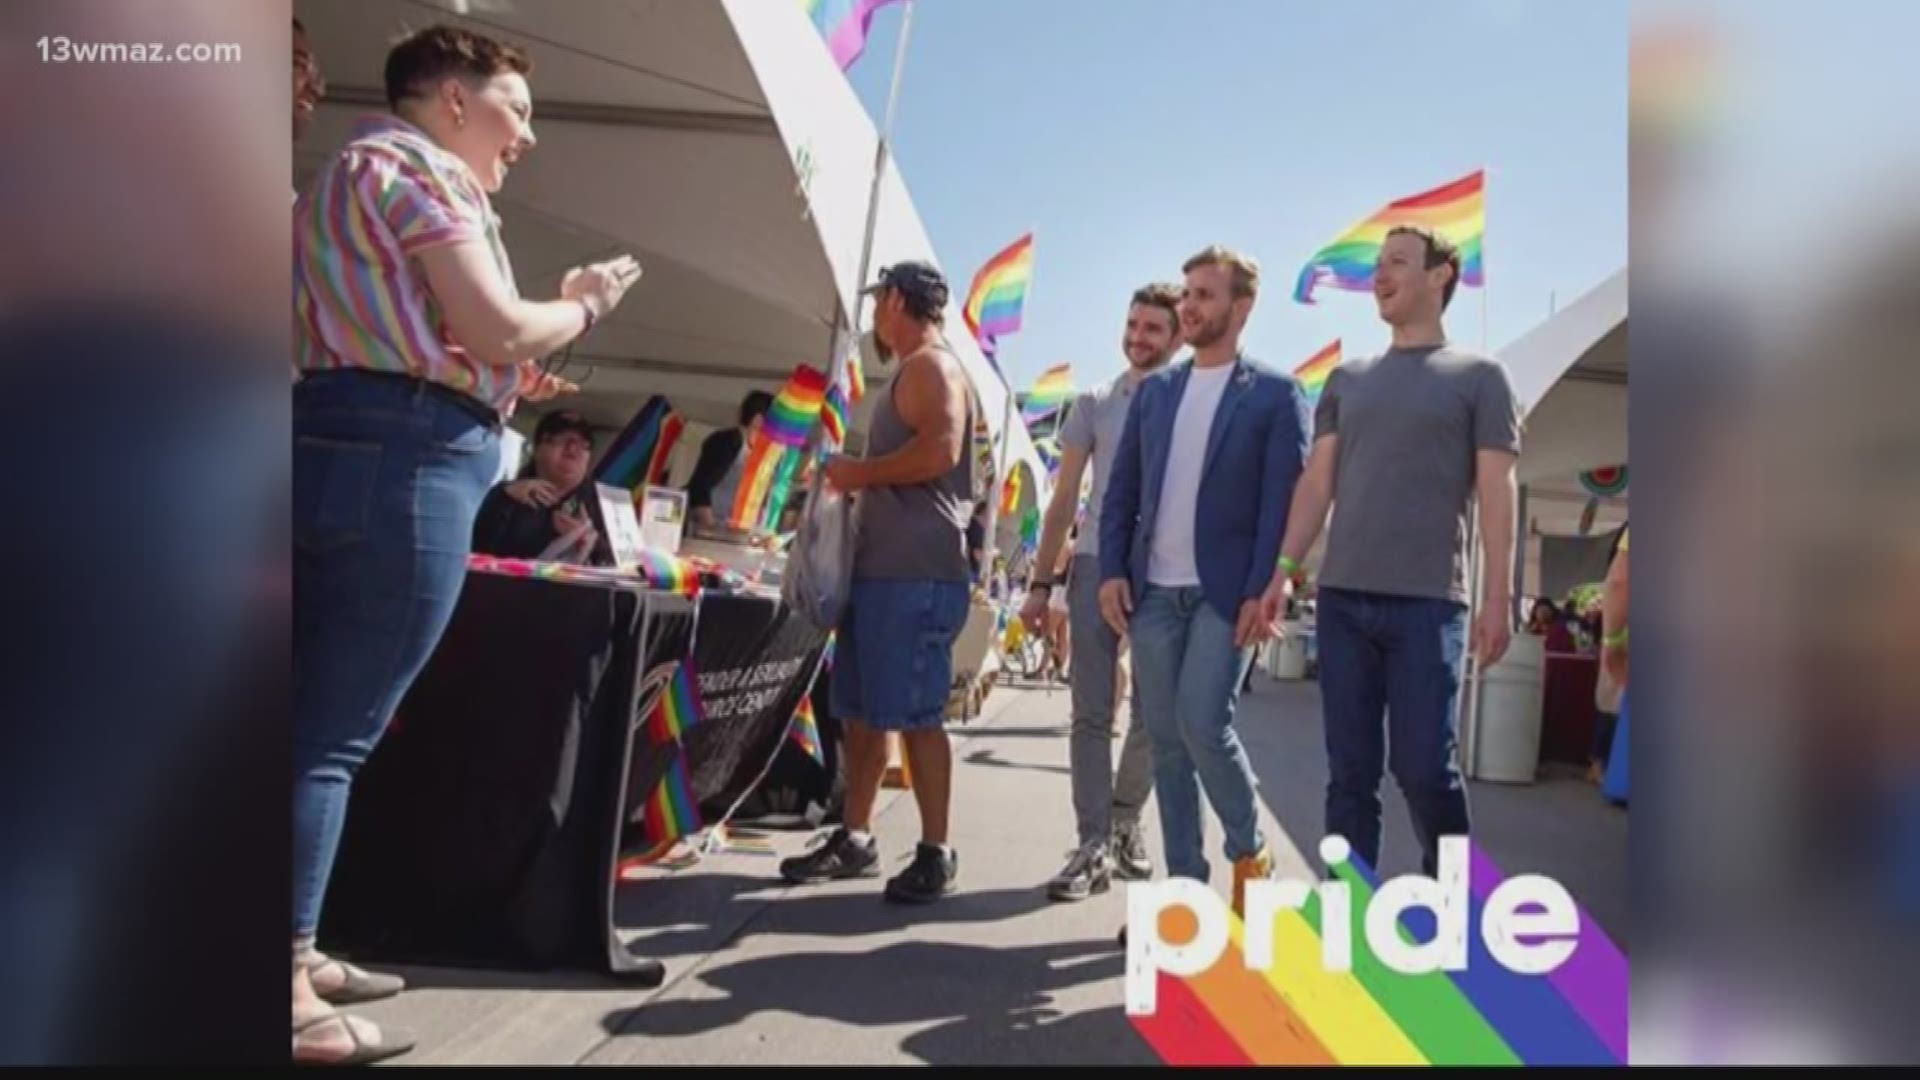 This weekend, Macon is bringing the Pride Month celebration to downtown. Volunteer organizer Demarcus Beckham says he wants Central Georgia's LGBTQ community to feel welcome at the event.